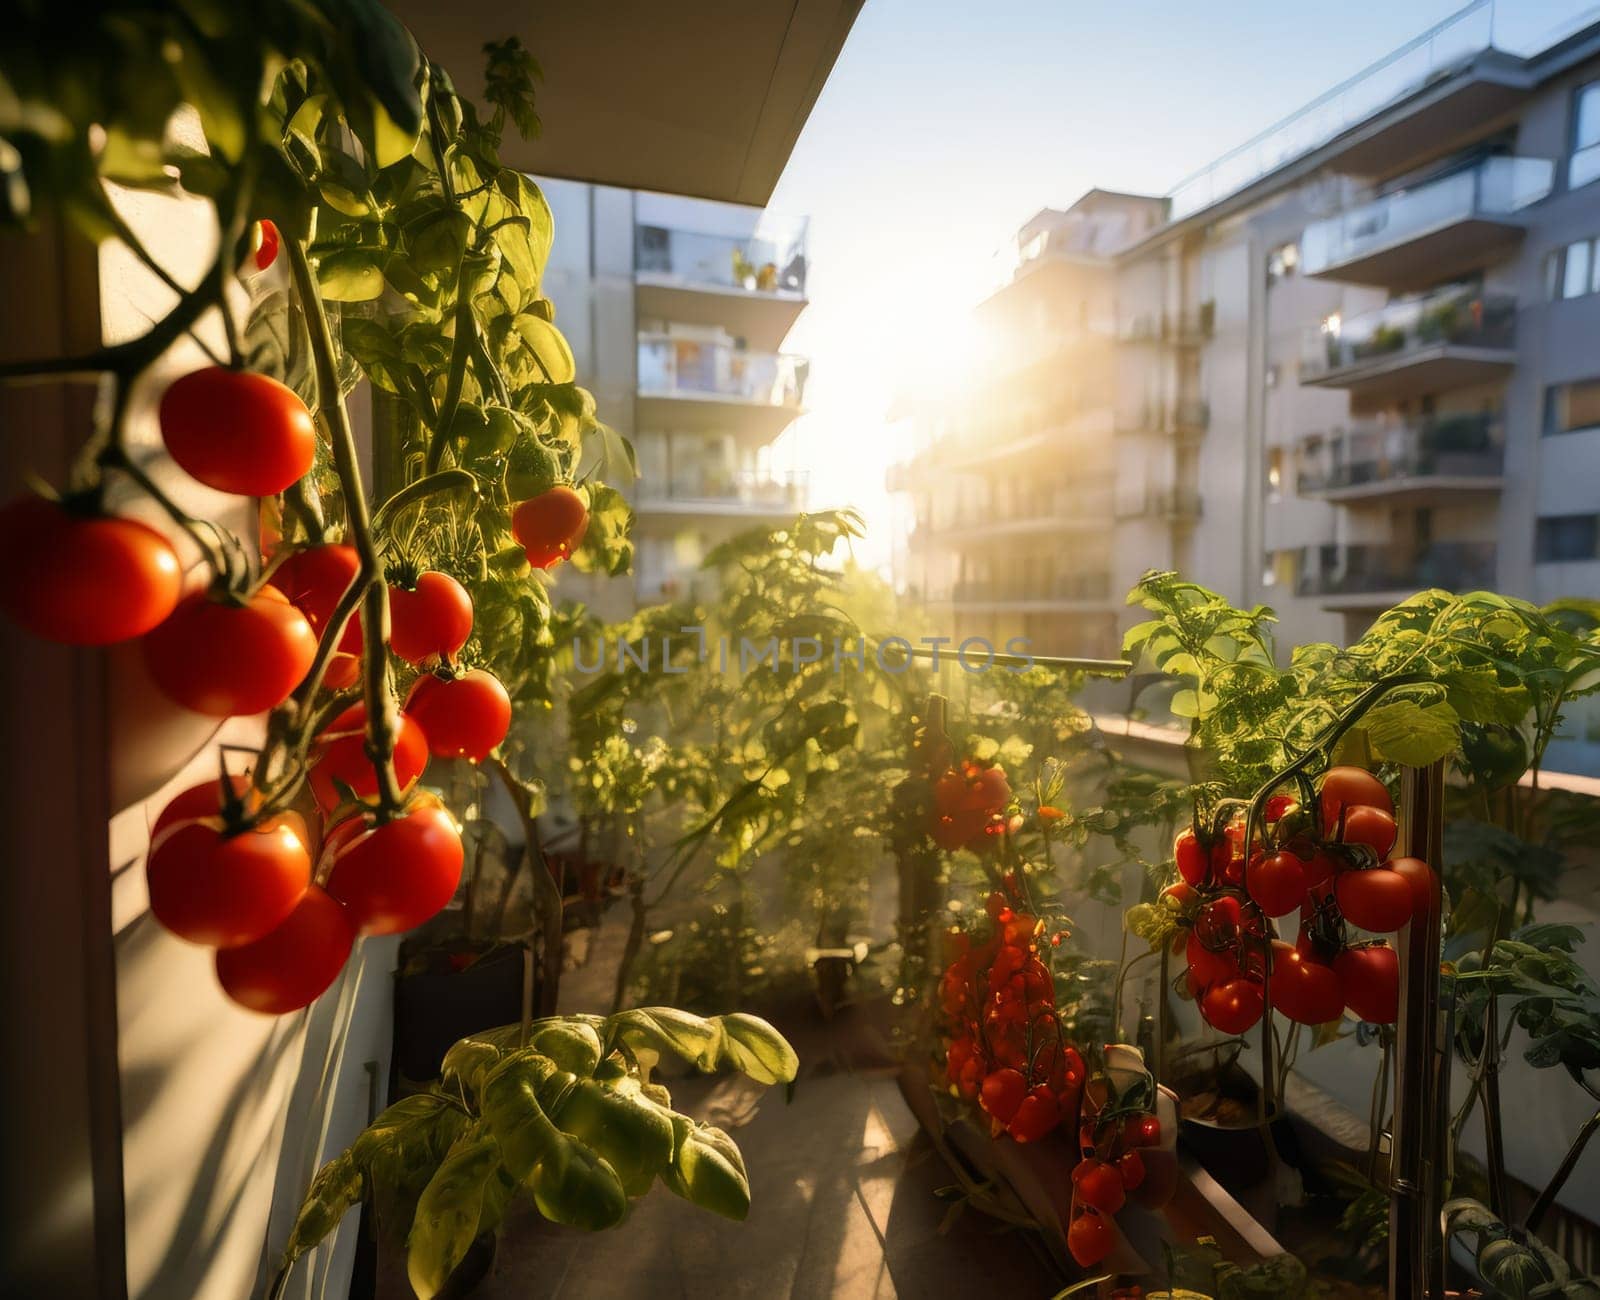 Balcony garden with cherry tomatoes. Close up view of bunch of red delicious ripe cherry tomatoes growing on balcony garden in city. Balcony urban gardening concept